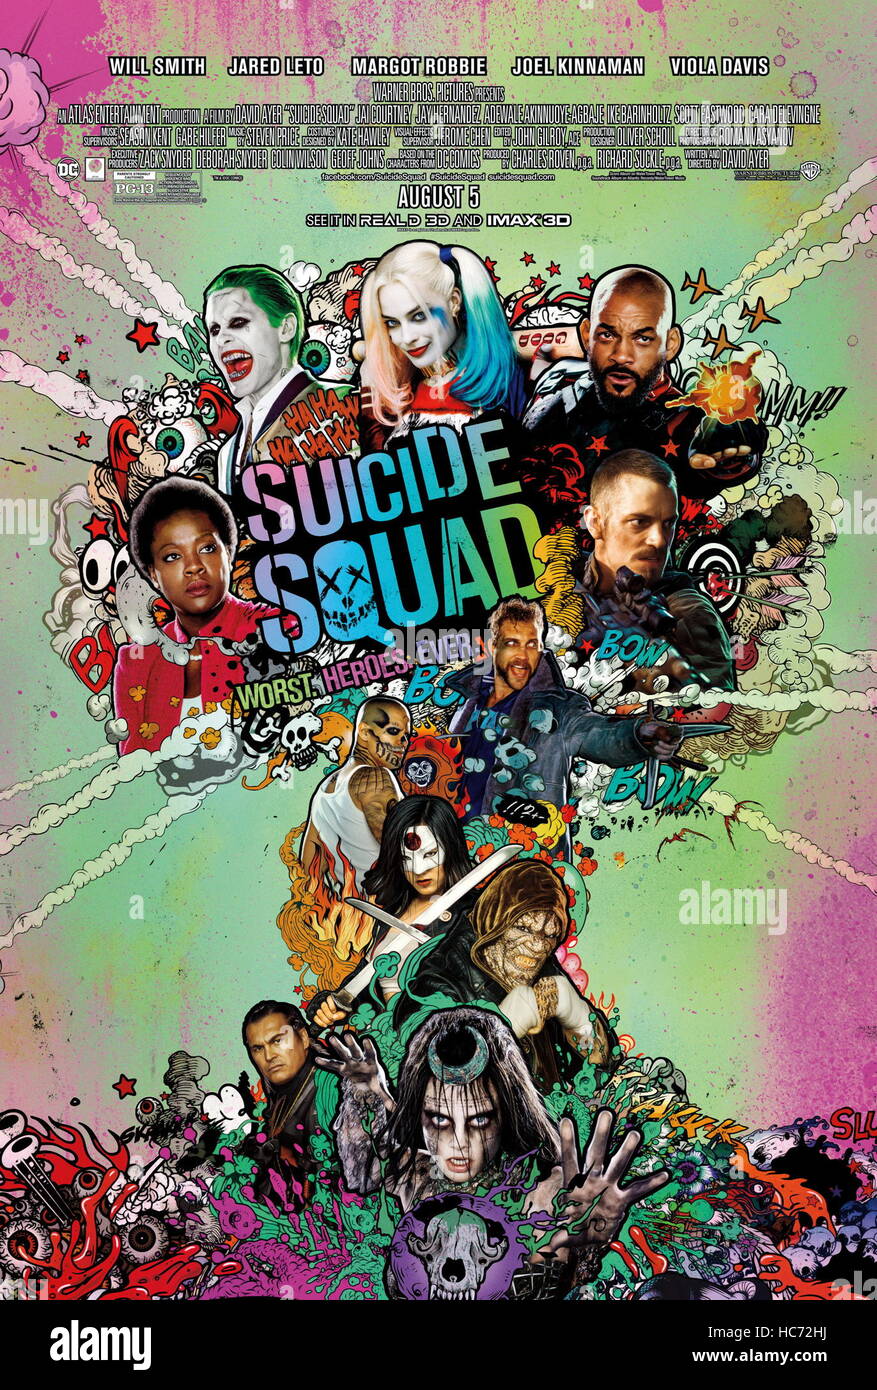 RELEASE DATE: August 5, 2016 TITLE: Suicide Squad STUDIO: Atlas Entertainment DIRECTOR: David Ayer PLOT: A secret government agency recruits imprisoned supervillains to execute dangerous black ops missions in exchange for clemency STARRING: Poster Art (Credit Image: c Atlas Entertainment/Entertainment Pictures/) Stock Photo